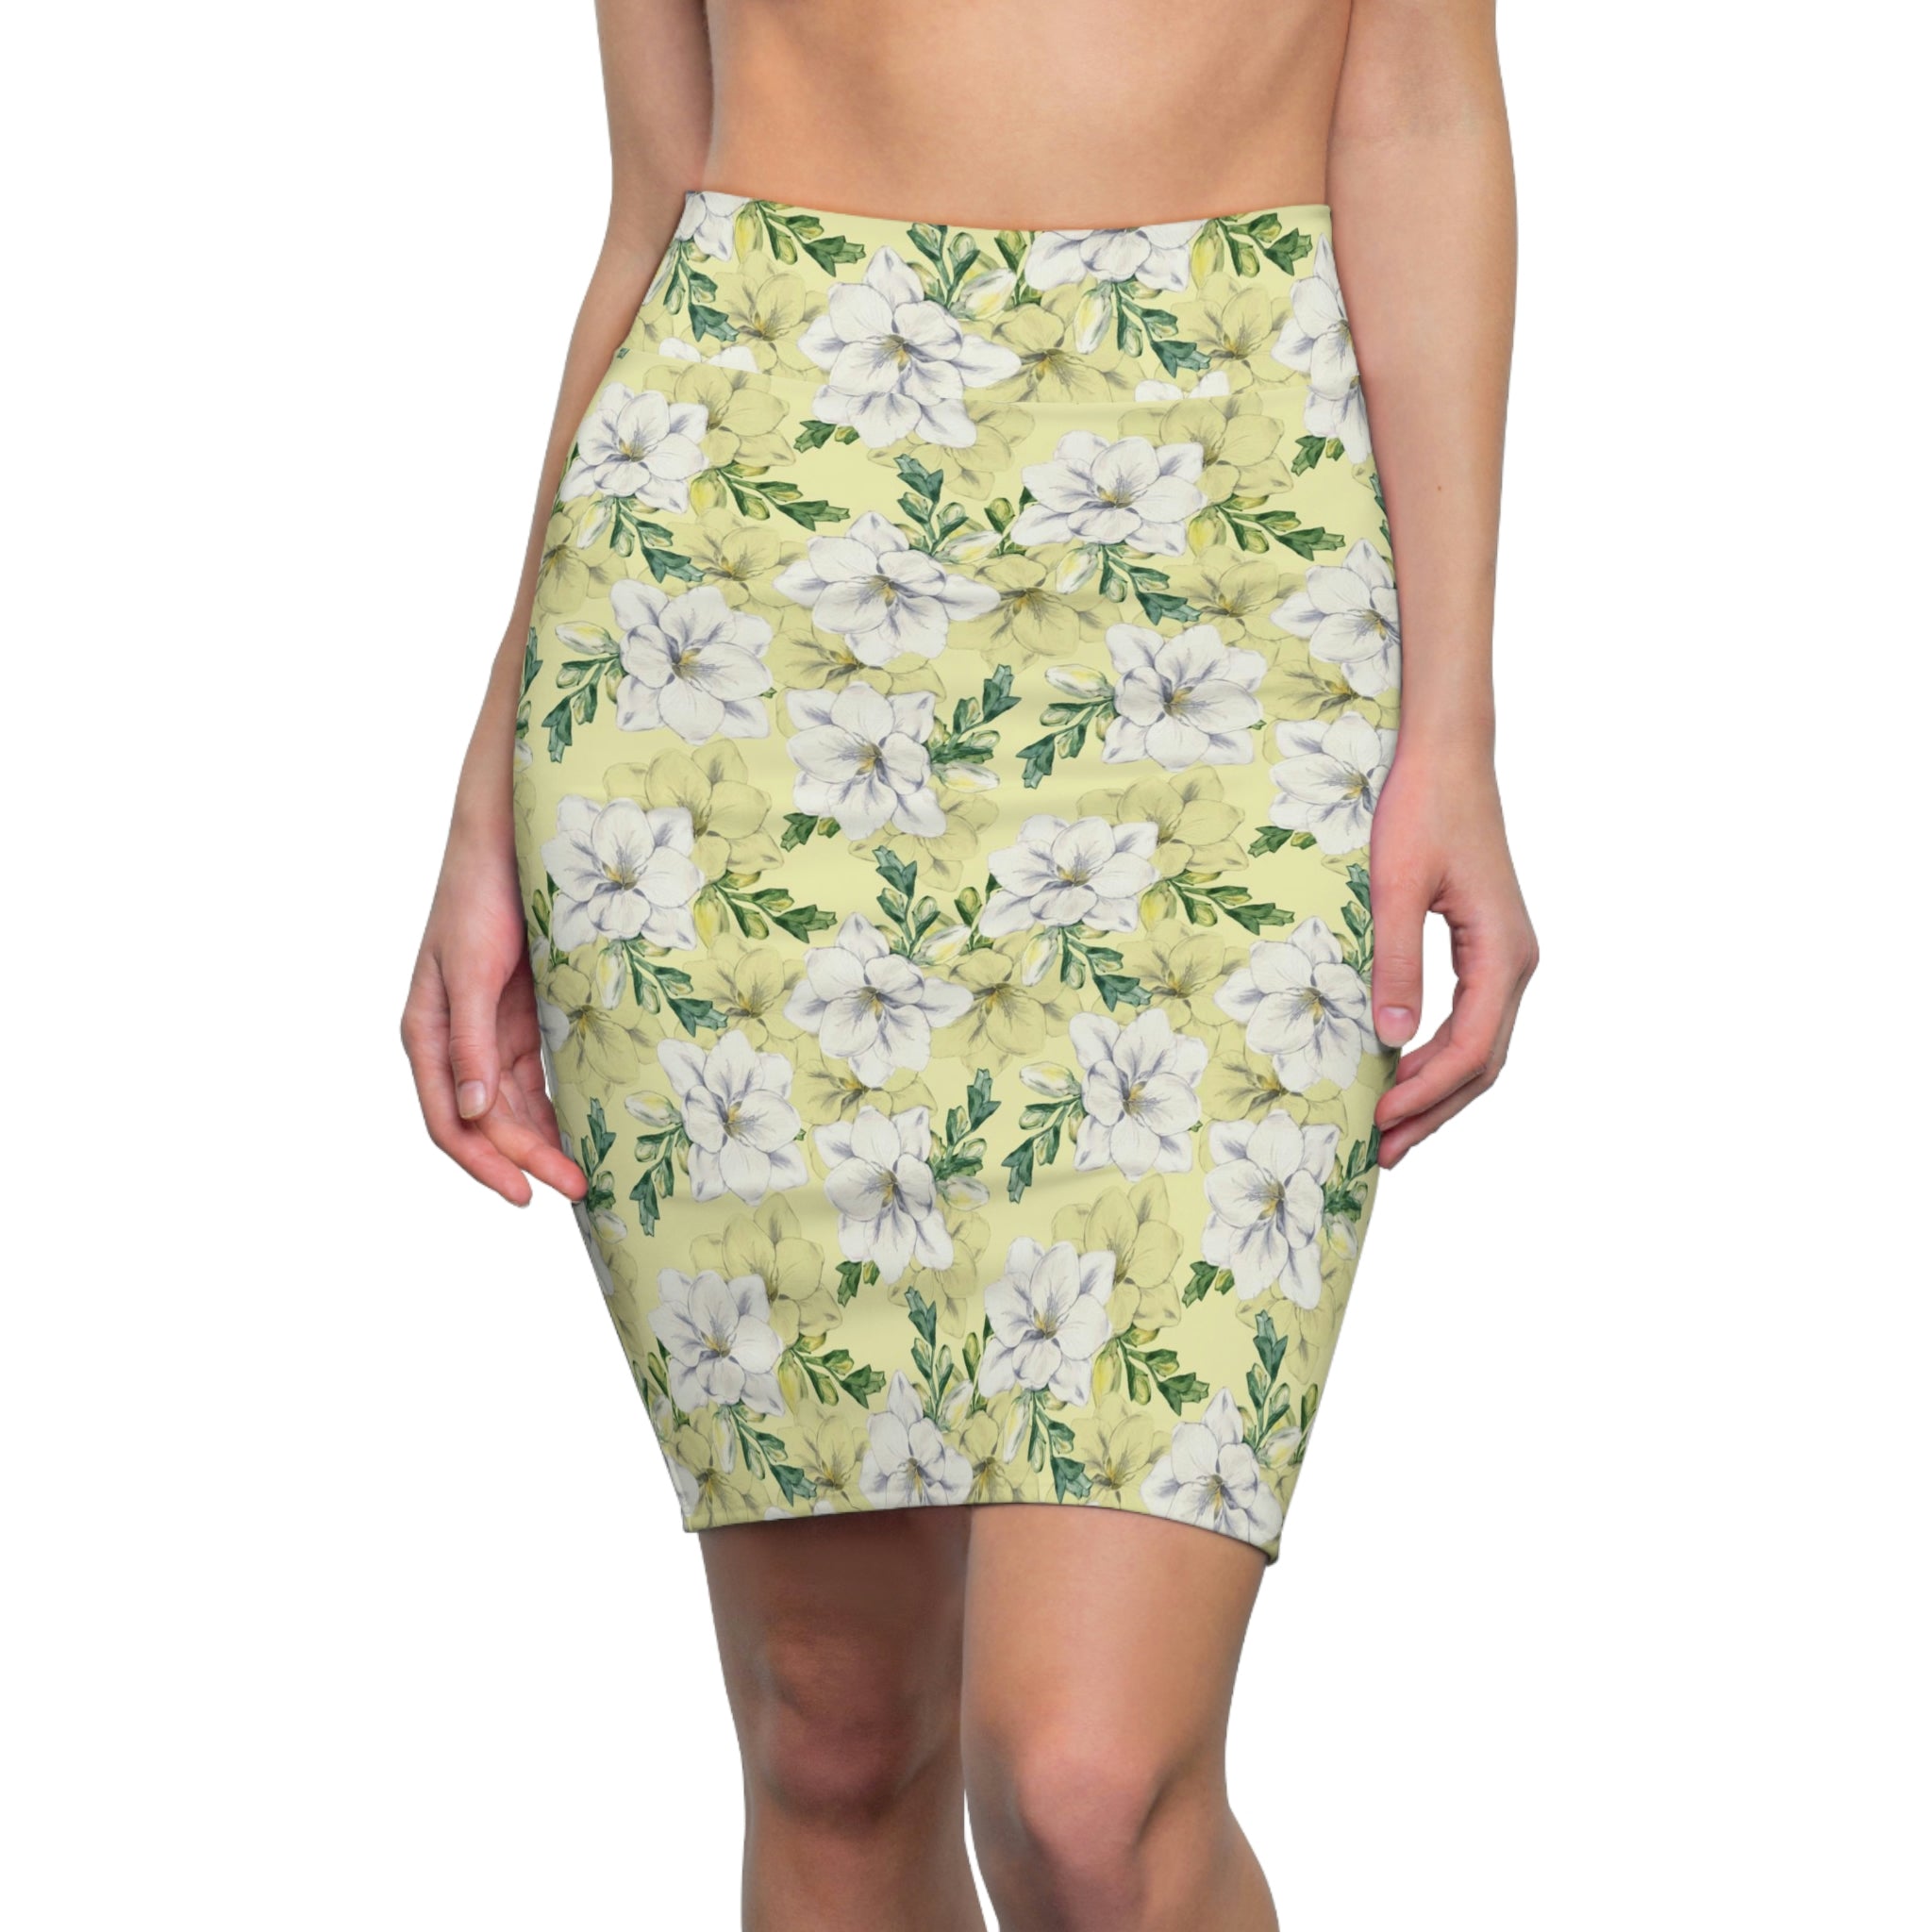 FLORAL LILIES YELLOW - Pencil Skirt